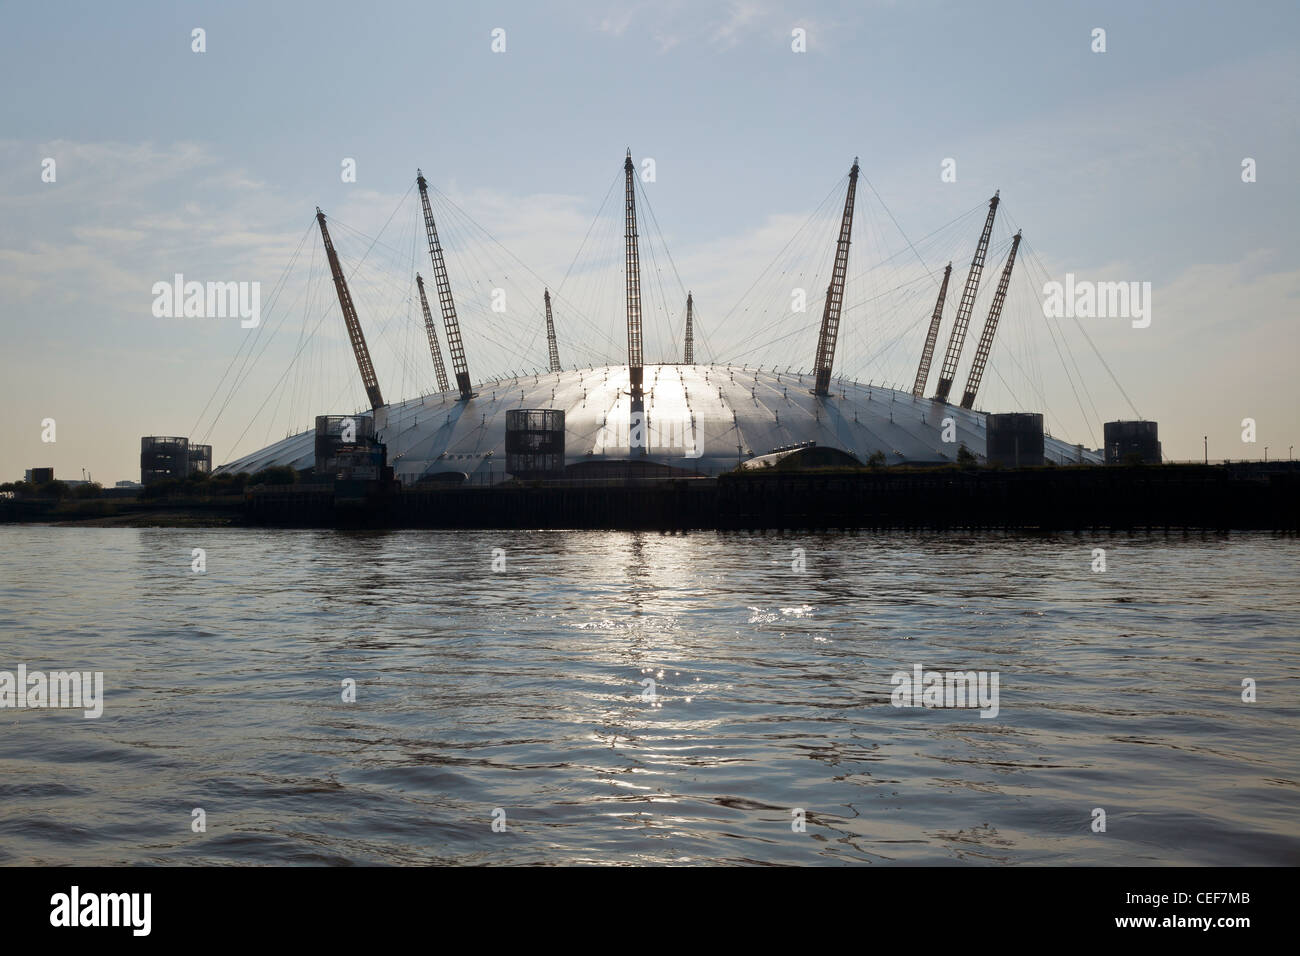 Milleniun Dome on the River Thames, taken from a boat on the Thames Stock Photo